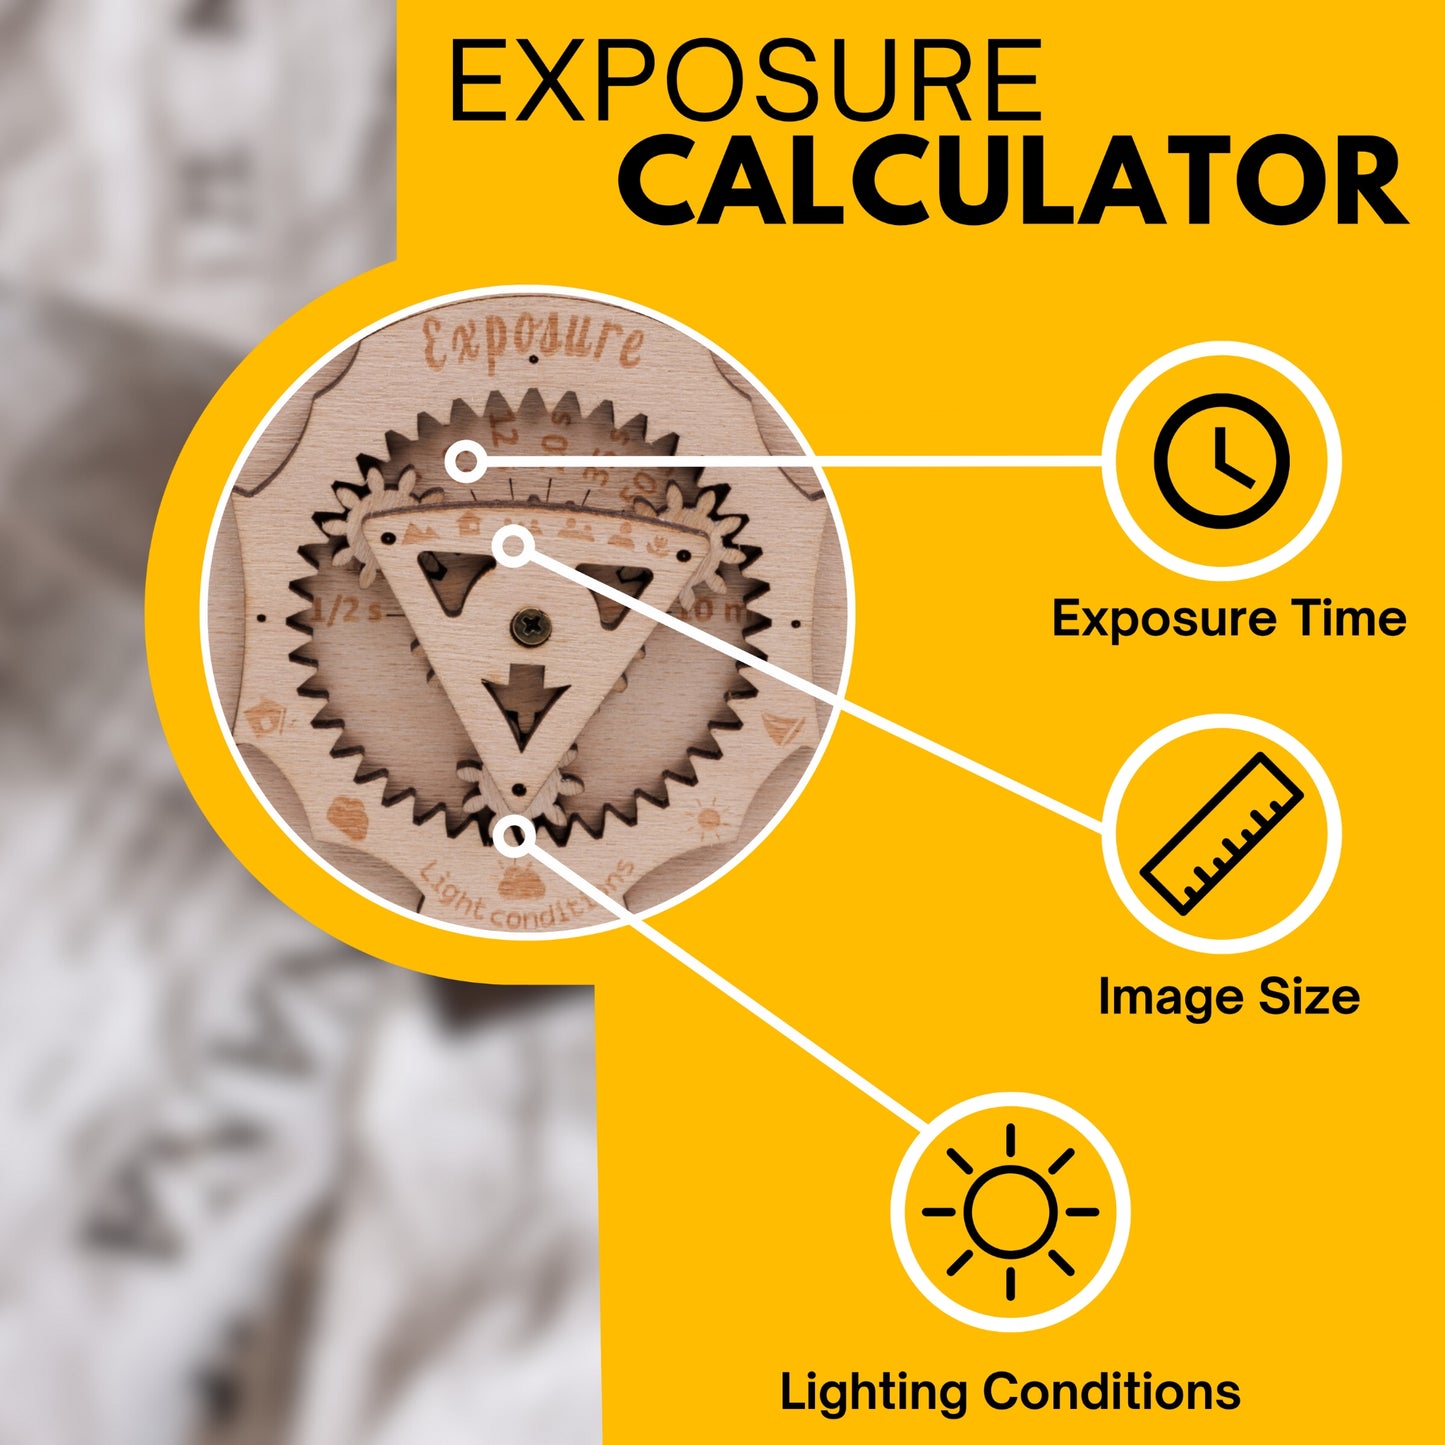 Infographics of an exposure calculator positioned on the rear cover of a Jollylook camera, providing quick-reference guidelines for photographers. The infographic delineates specifications including exposure time, image size, and lighting conditions, enabling users to ascertain optimal settings for various lightings.